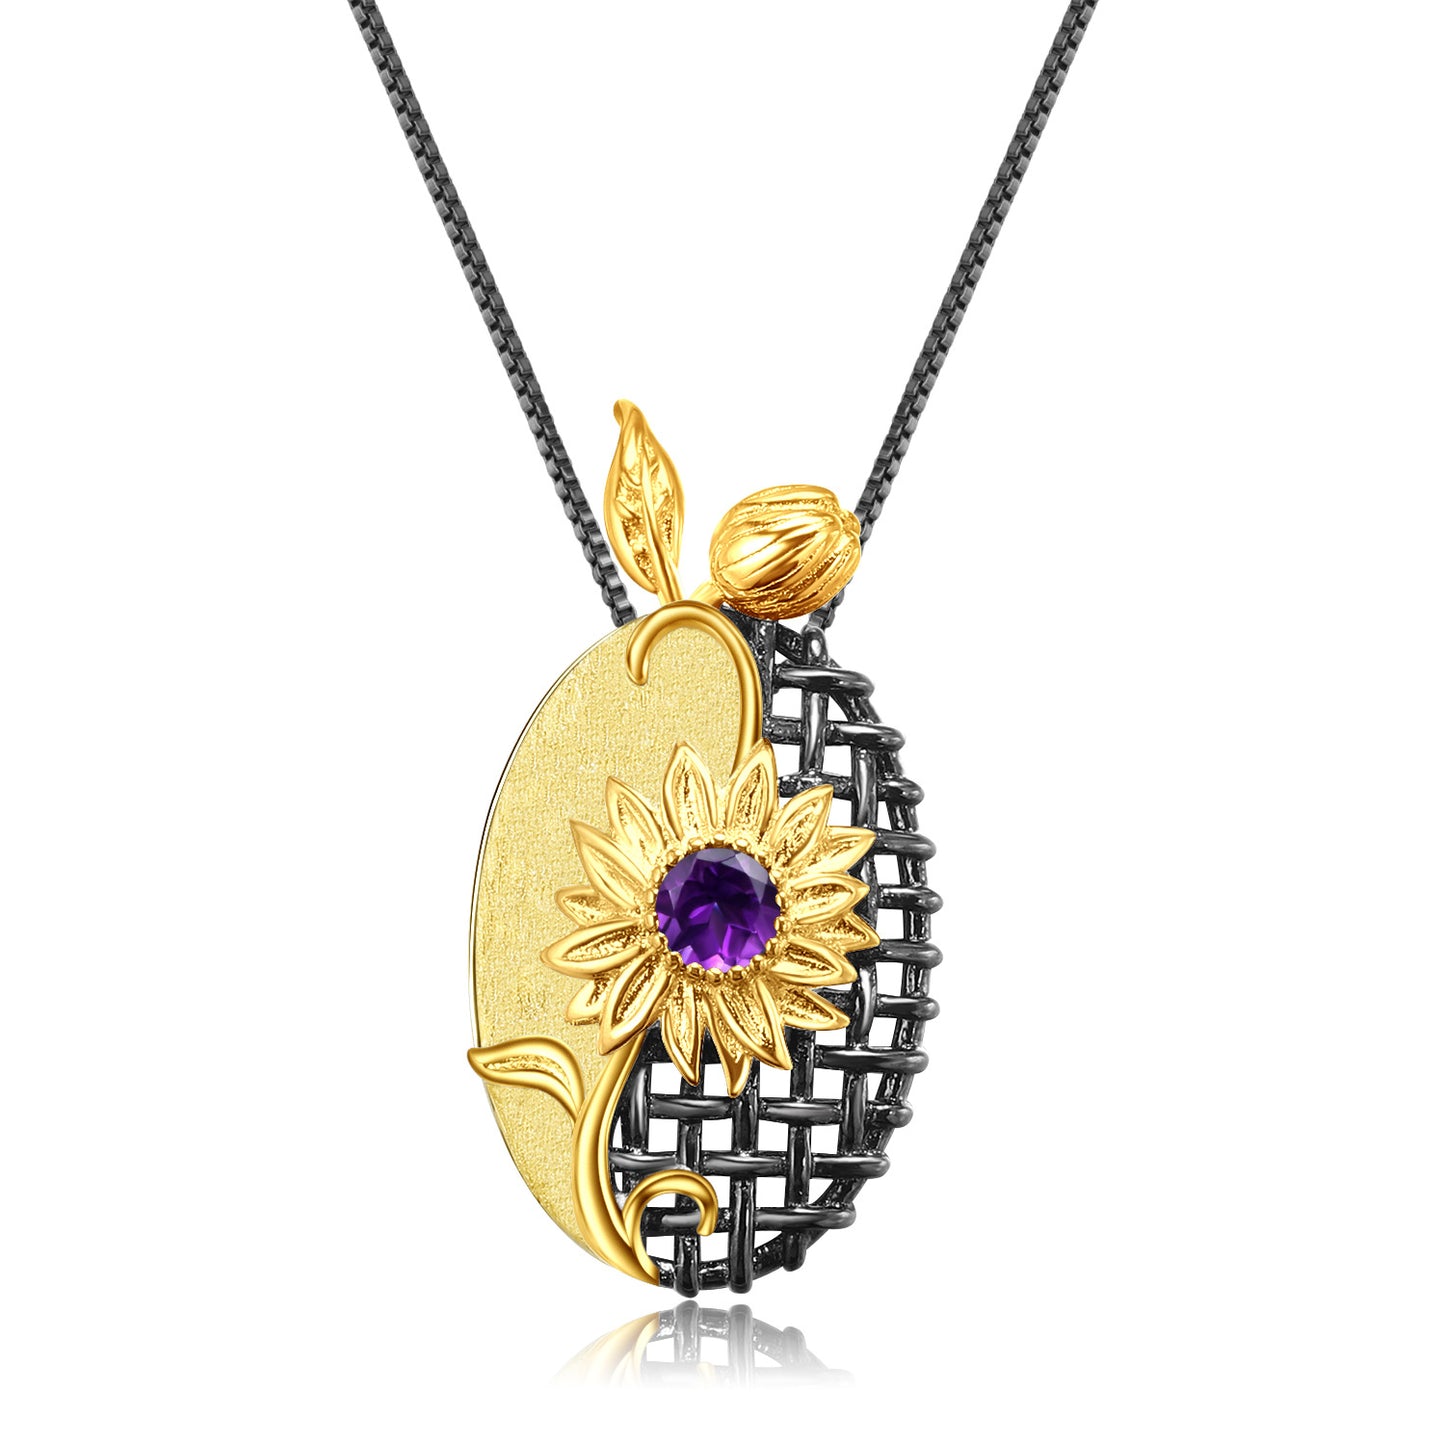 Italian Craft Design Other Shore Flower Luxury Sense Natural Amethyst Pendant Silver Necklace for Women